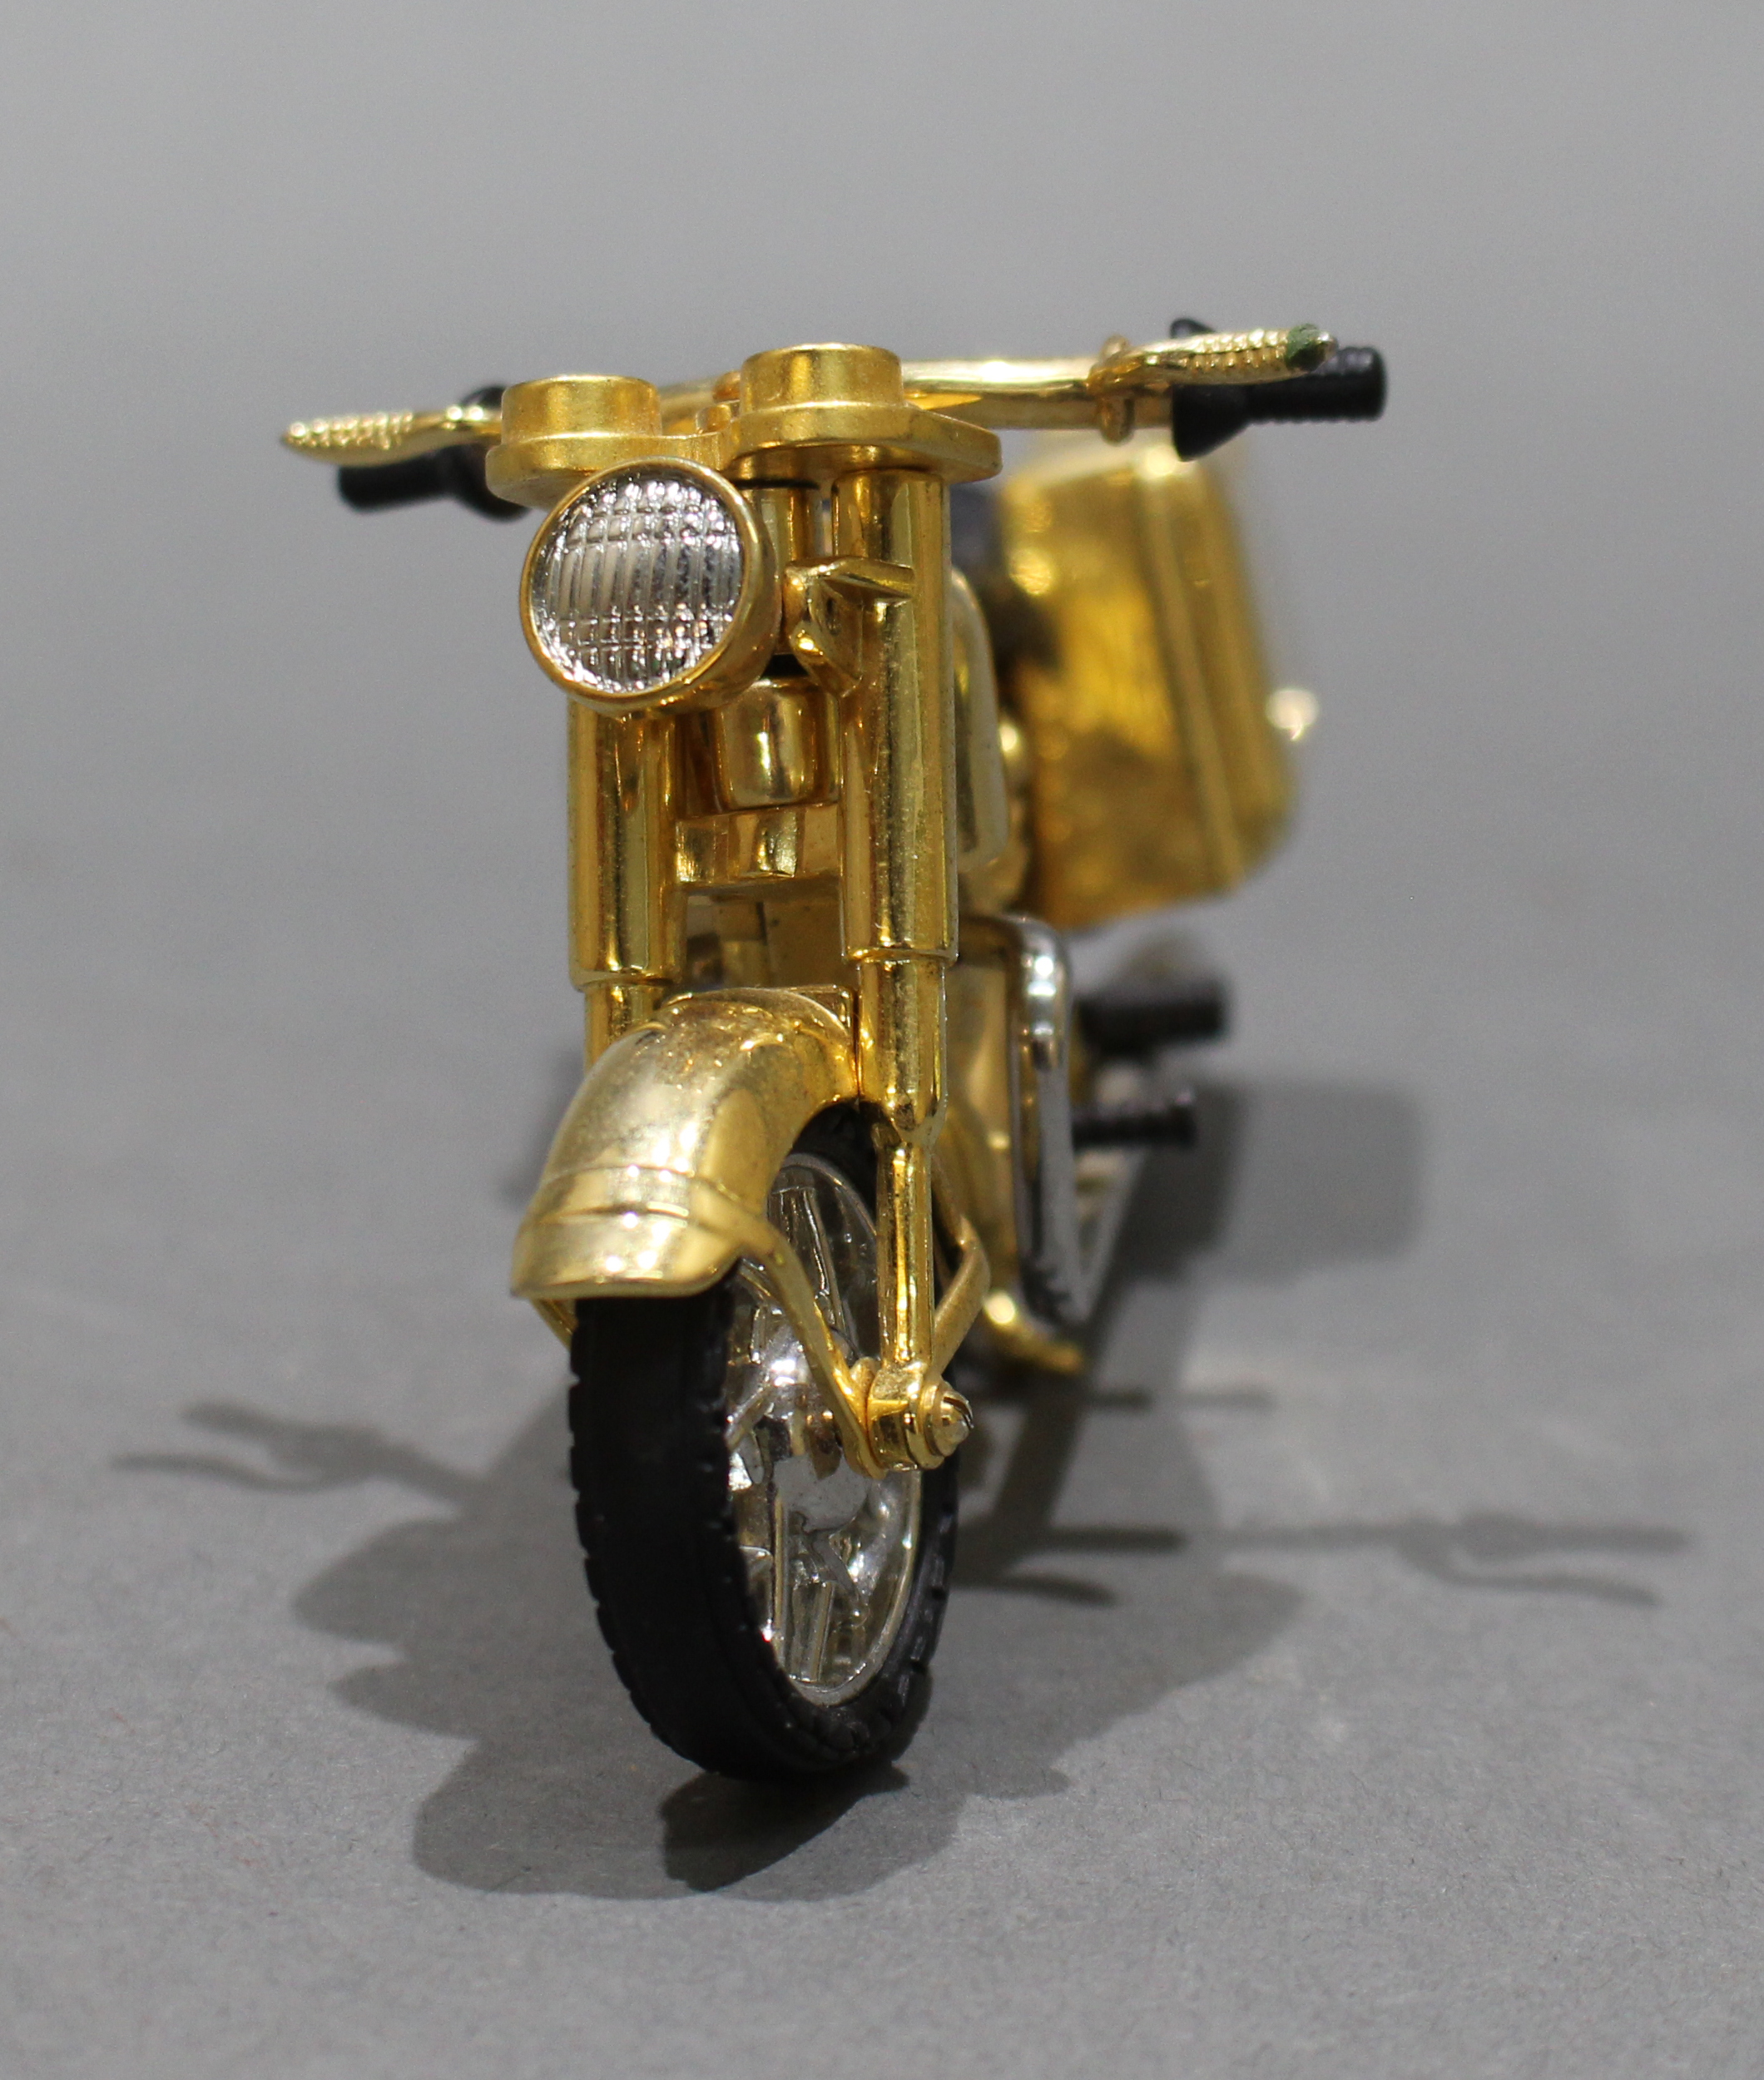 Woodford Gold Plated Motorbike Clock - Image 4 of 4